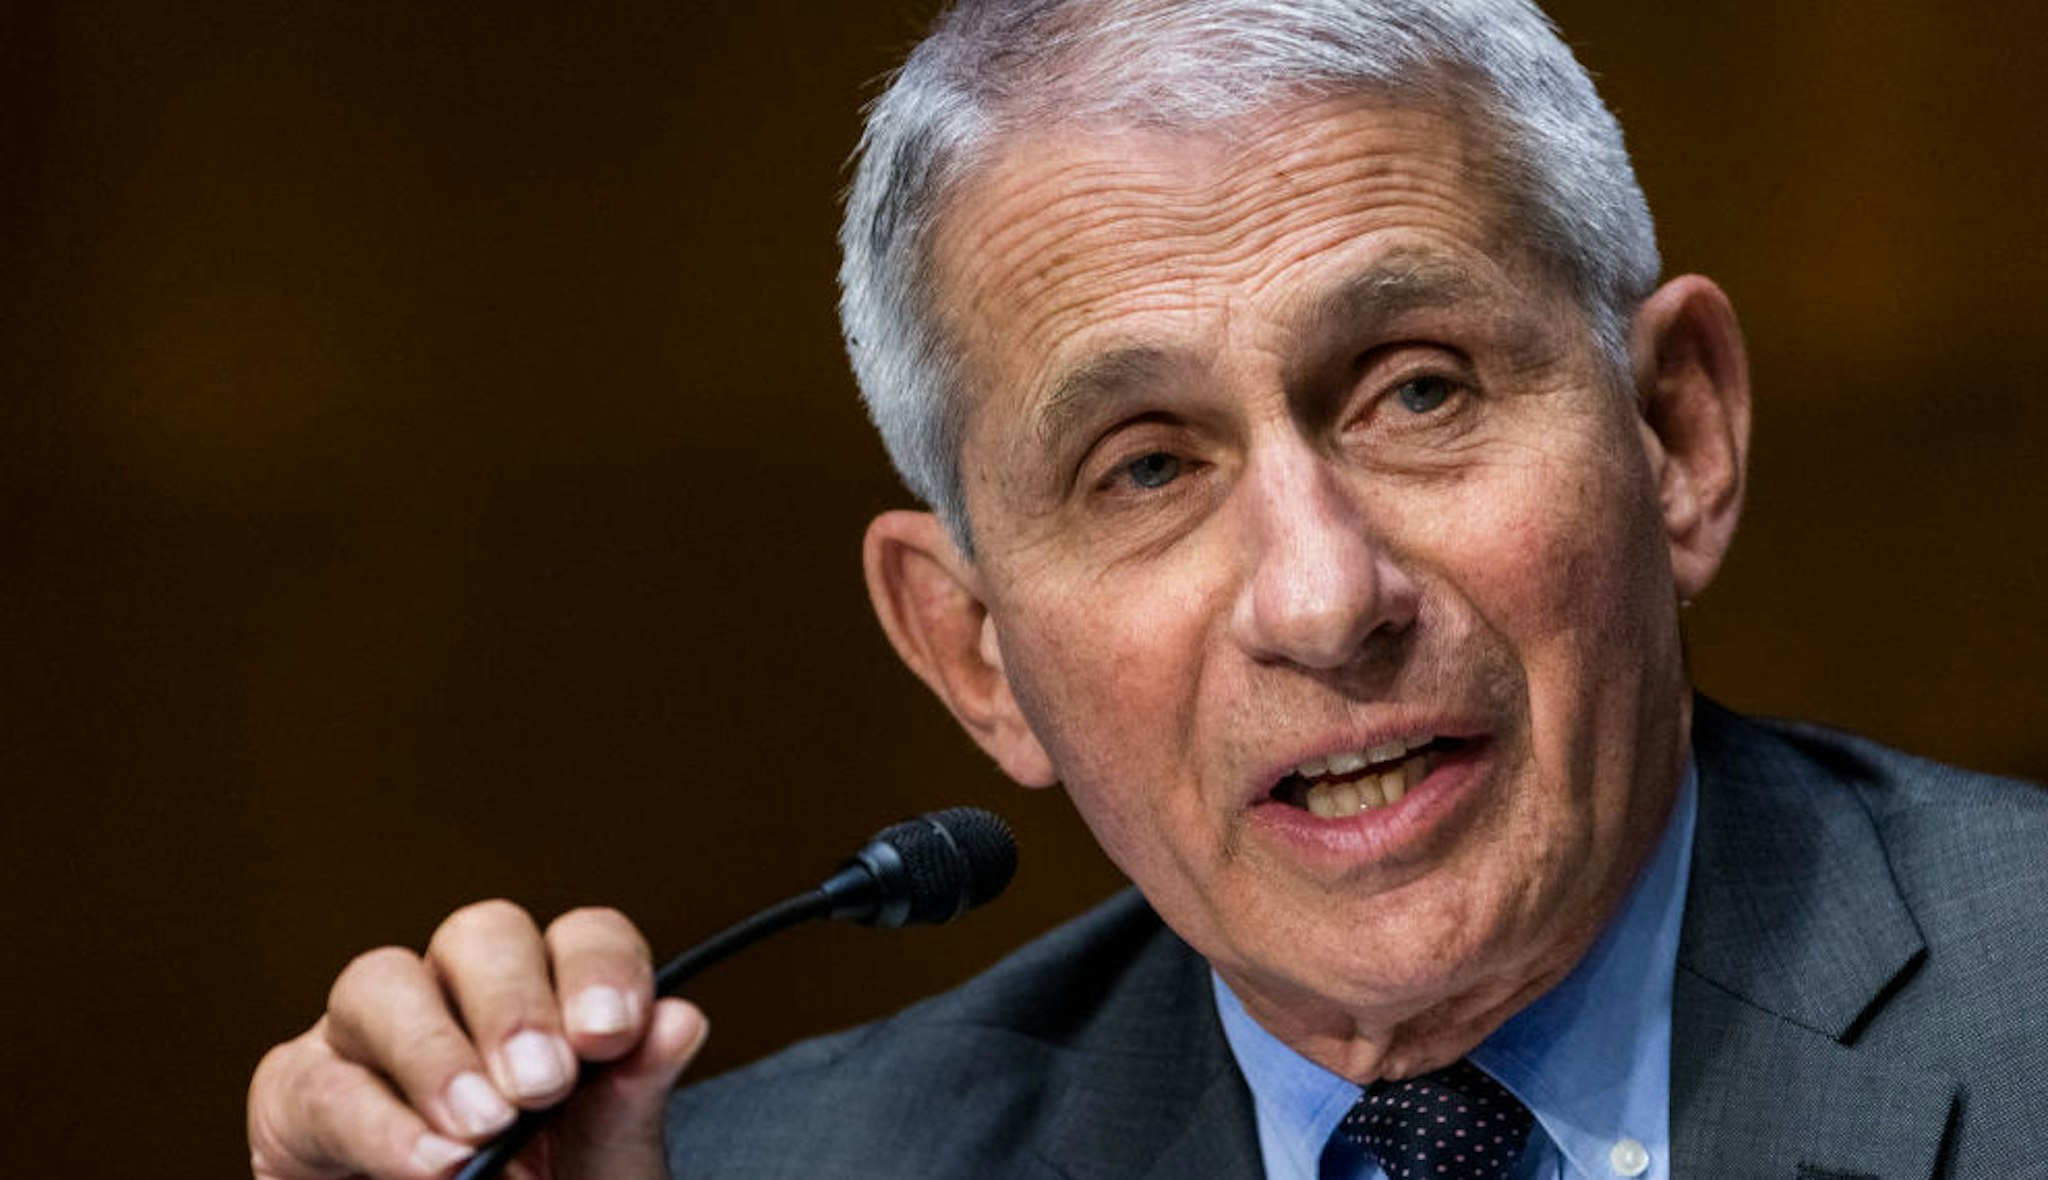 WASHINGTON, DC - MAY 11: Anthony Fauci, Director of the National Institute of Allergy and Infectious Diseases at the National Institutes of Health (NIH), testifies before a Senate Health, Education, Labor, and Pensions hearing to examine an update from Federal officials on efforts to combat COVID-19 in the Dirksen Senate Office Building on May 11, 2021 in Washington, DC.